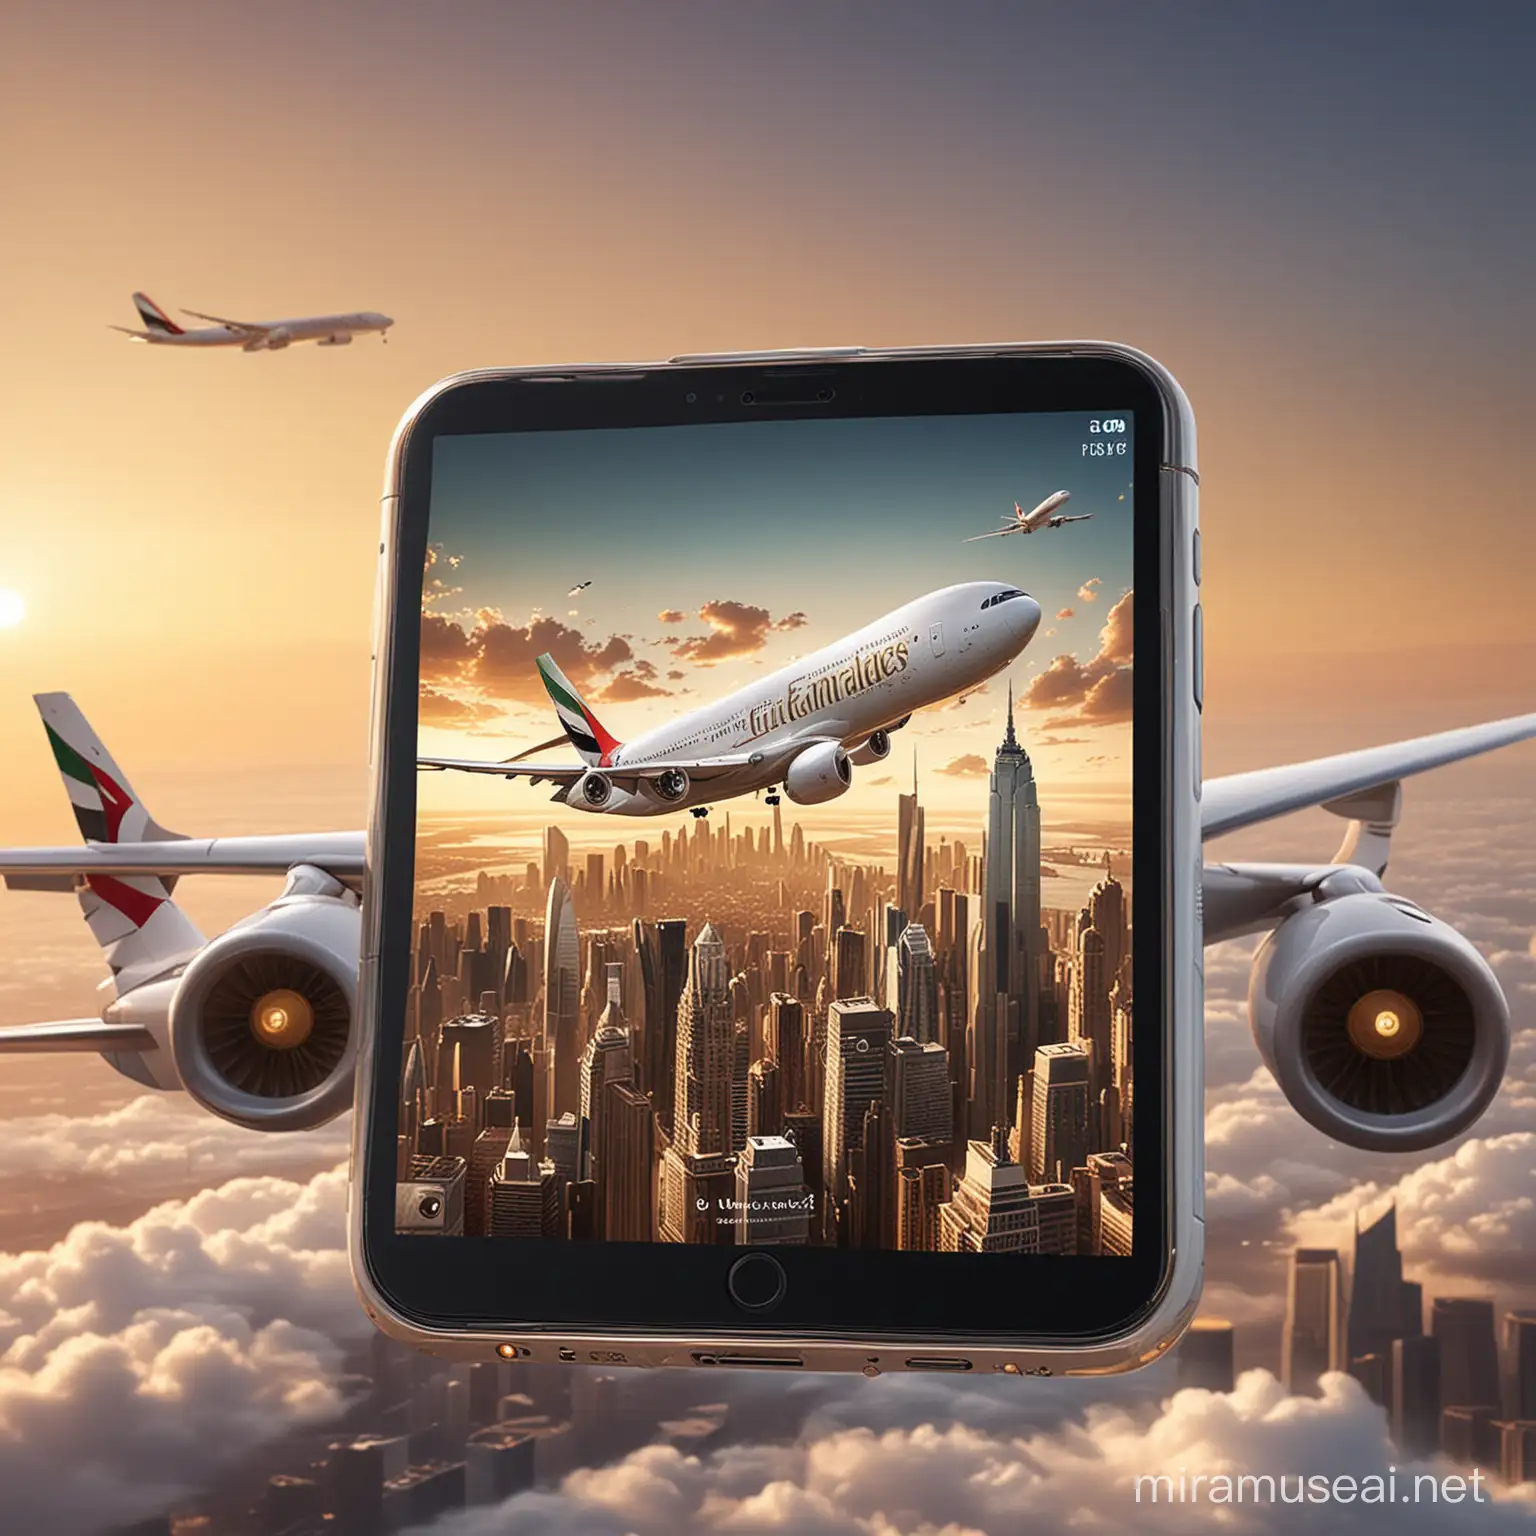 Create a highly stylized digital artwork that seamlessly blends a smartphone and a commercial airliner into one object. The smartphone's screen is to display a futuristic city skyline, indicating a travel theme, with the branding 'Emirates' prominently featured. The body of the airplane should emerge from the smartphone, suggesting they are one entity, to symbolize the intersection of advanced technology and luxury air travel. The style should be surrealistic and glossy, with a high degree of shine and reflection. The lighting should be dramatic, with a golden hue reminiscent of sunrise or sunset, adding to the premium feel of the composition. The background should be a gradient of soft white to highlight the silhouette of the combined objects, 32k render, hyperrealistic, detailled.